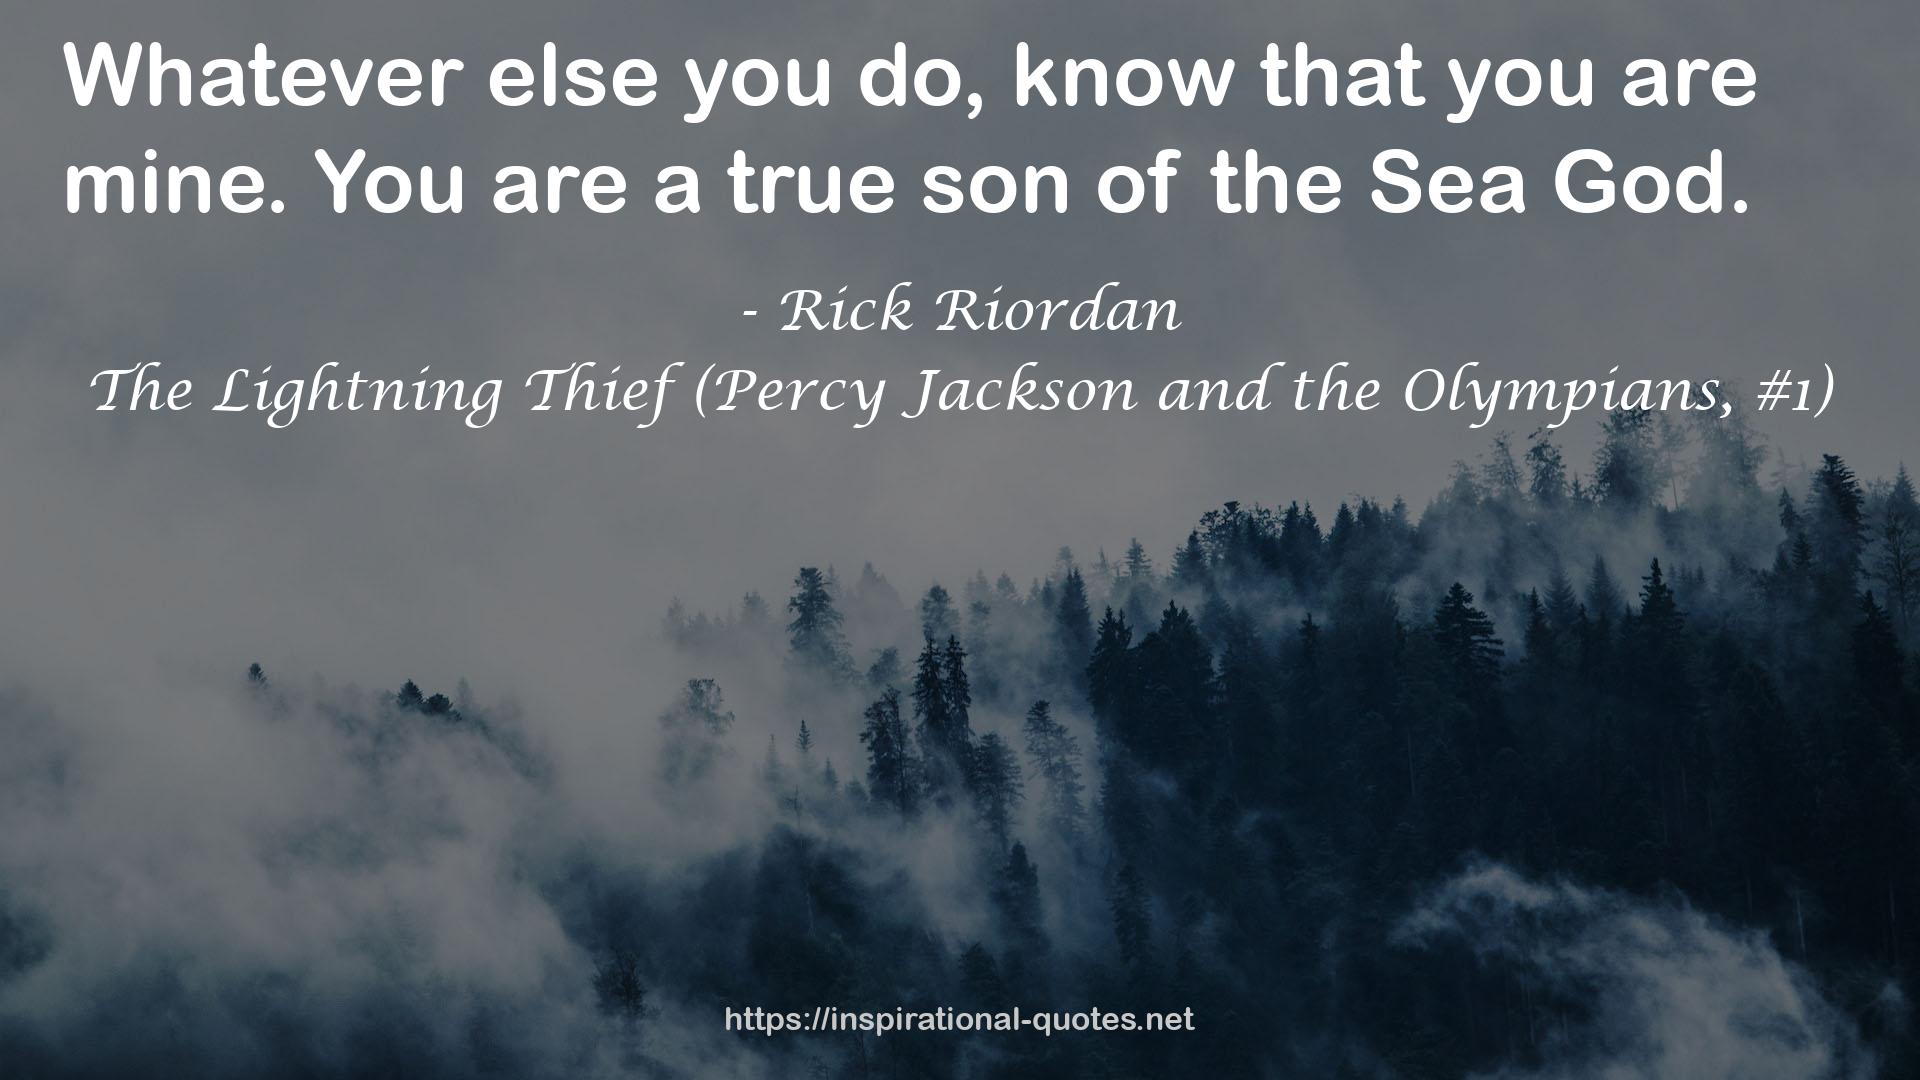 The Lightning Thief (Percy Jackson and the Olympians, #1) QUOTES